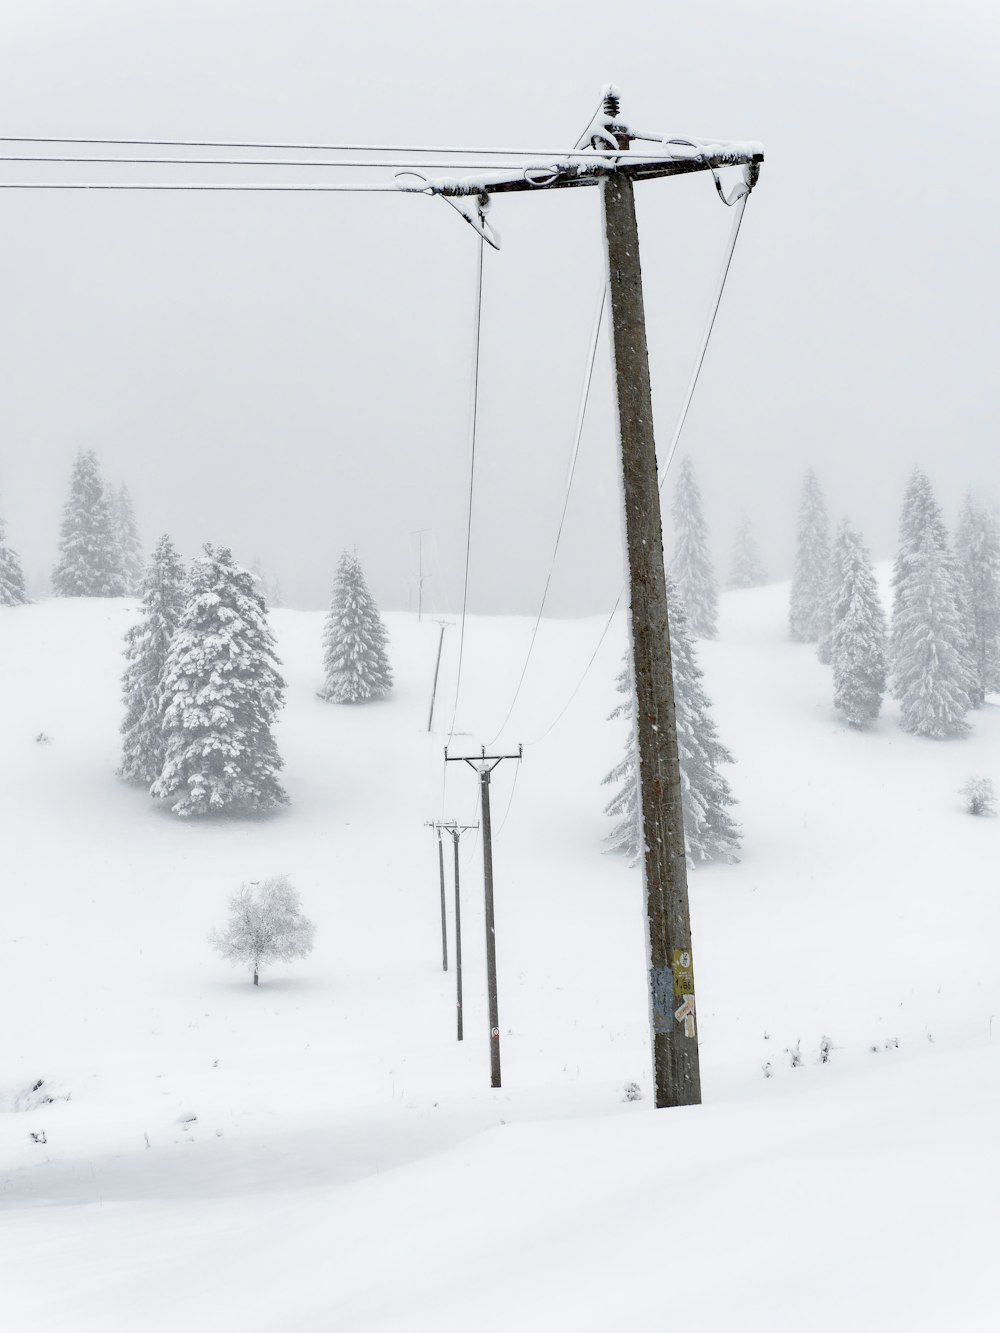 a ski lift in the middle of a snowy landscape